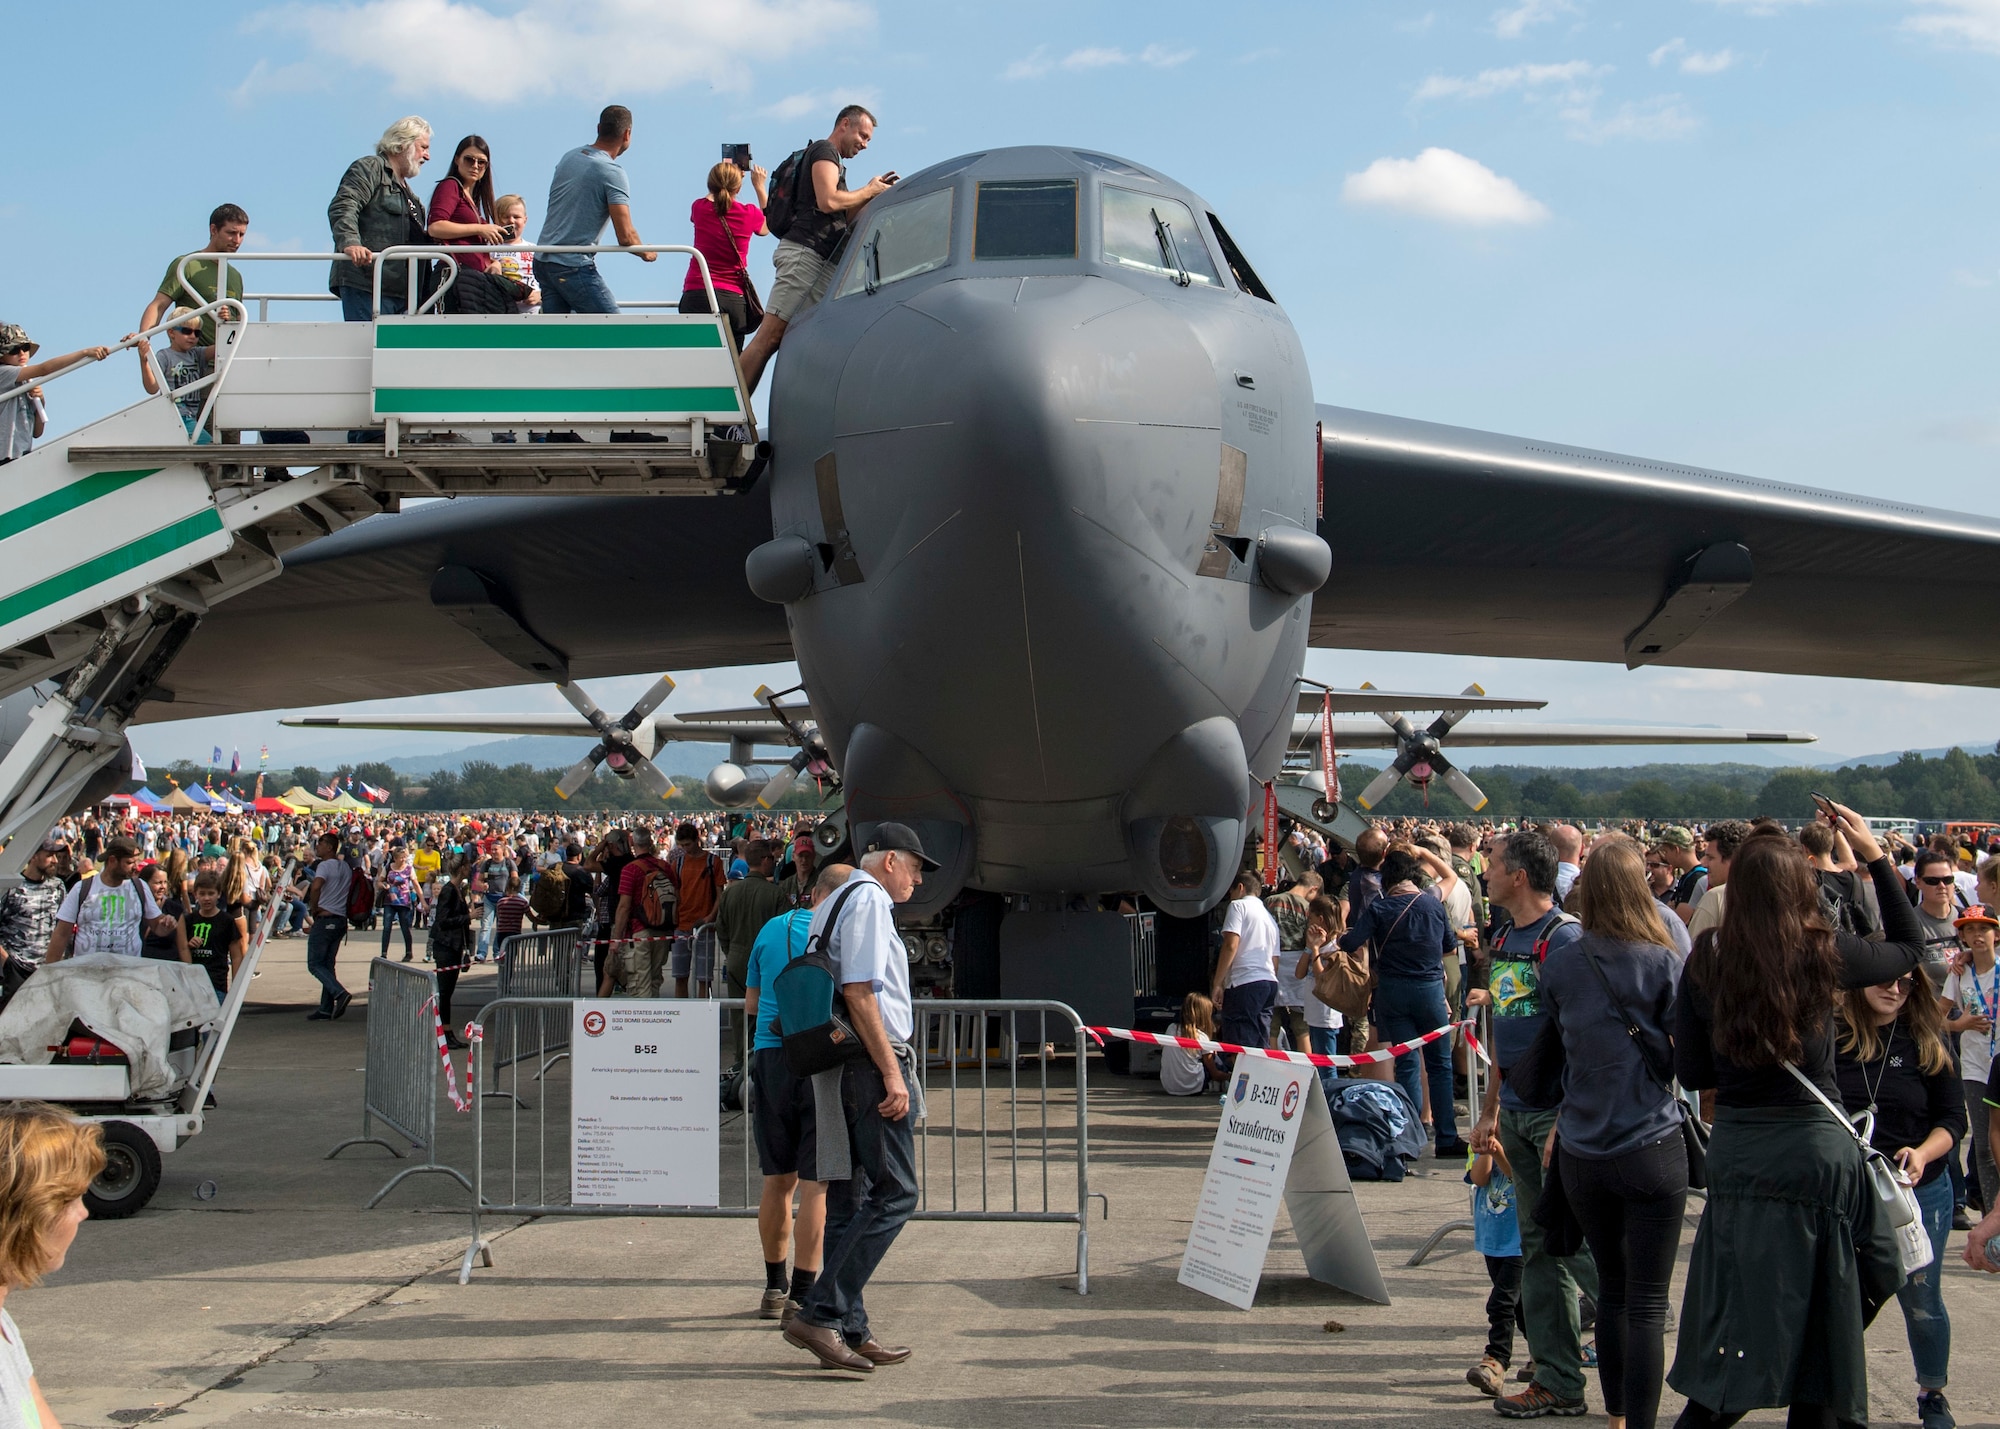 An Air Force Reserve Command B-52 Stratofortress, assigned to the 307th Bomb Wing, Barksdale Air Force Base, Louisiana, is on display at Ostrava Air Base, Czech Republic, during NATO Days. NATO Days is a Czech Republic-led air show and exhibition that showcases military ground and aviation capabilities from 19 nations. Participation in NATO Days increases our understanding of European ally and partner capabilities, greatly enhancing our ability to operate together as a team. (U.S. Navy photo by Mass Communication Specialist 2nd Class Robert J. Baldock)